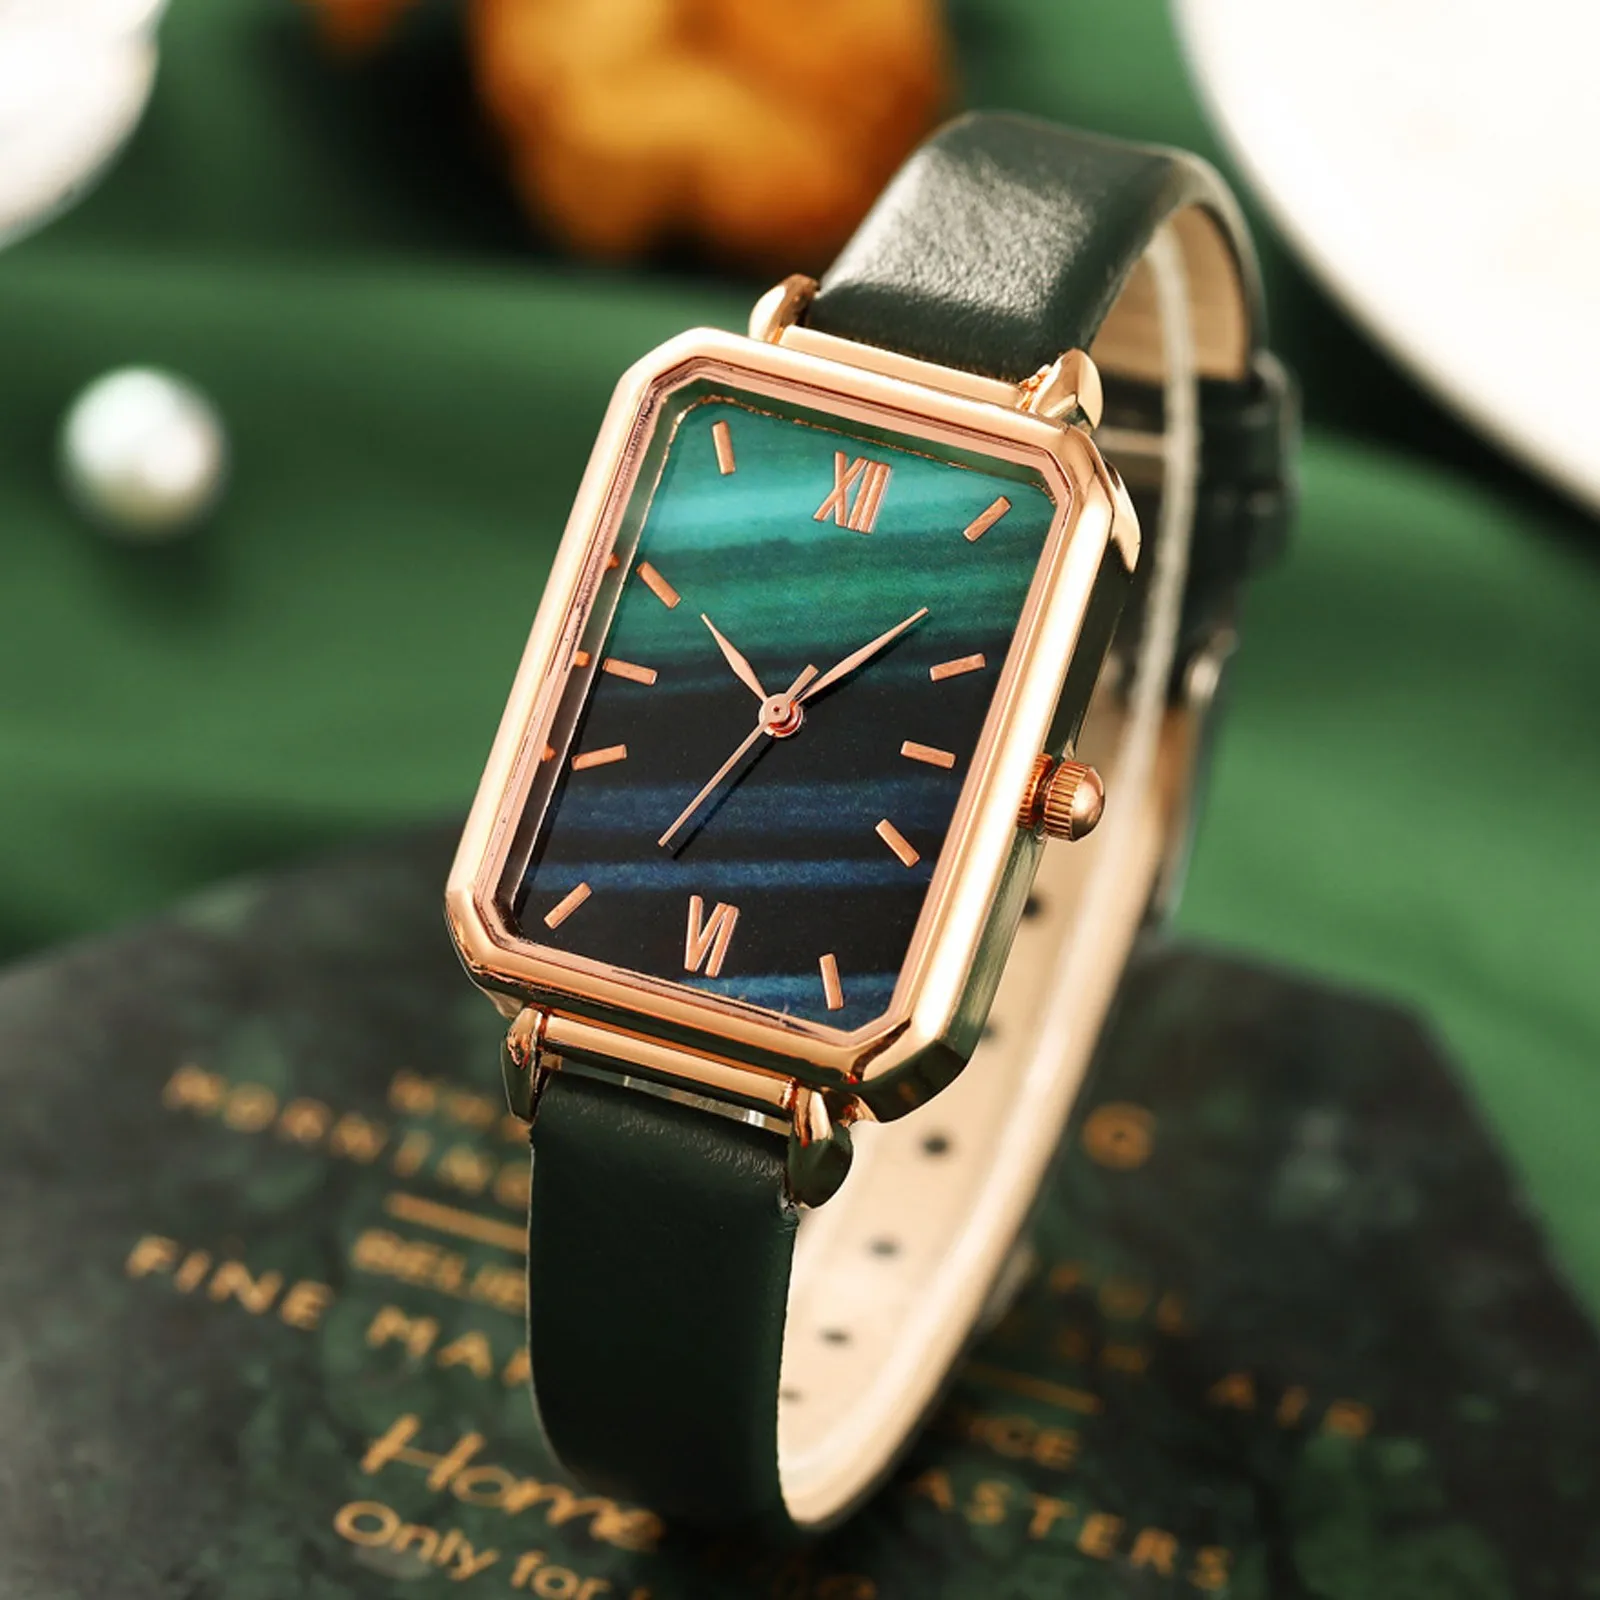 

2021 Hot Ladies Retro Watches Leather Womens Analog Wrist Watch Gradient Rectangle Dial Quartz Wristwatch Gift Relojes Mujer